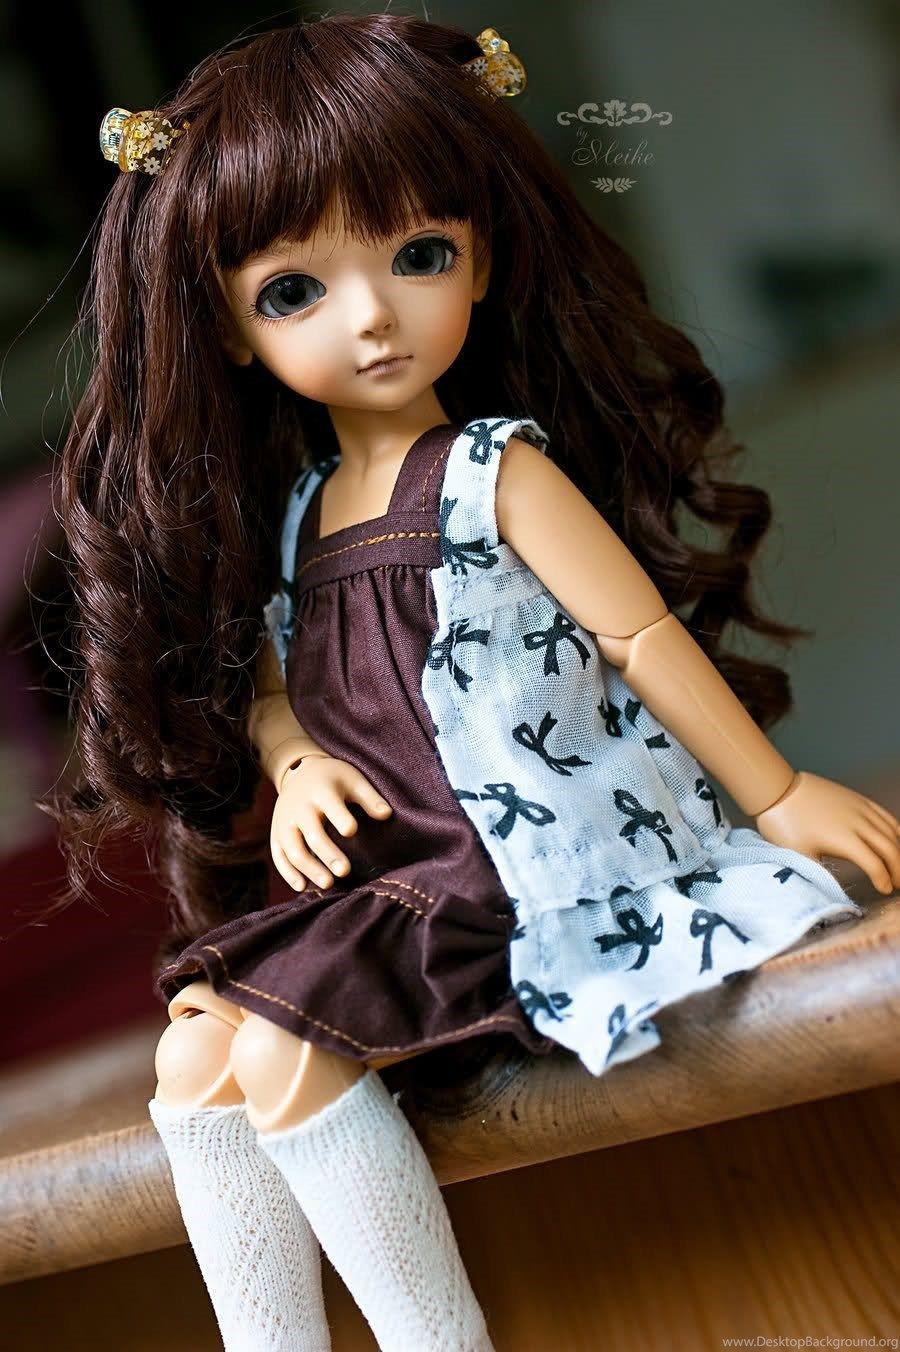 Cute Doll Wallpaper For Facebook Cute Lovely Dolls Picture Dolls